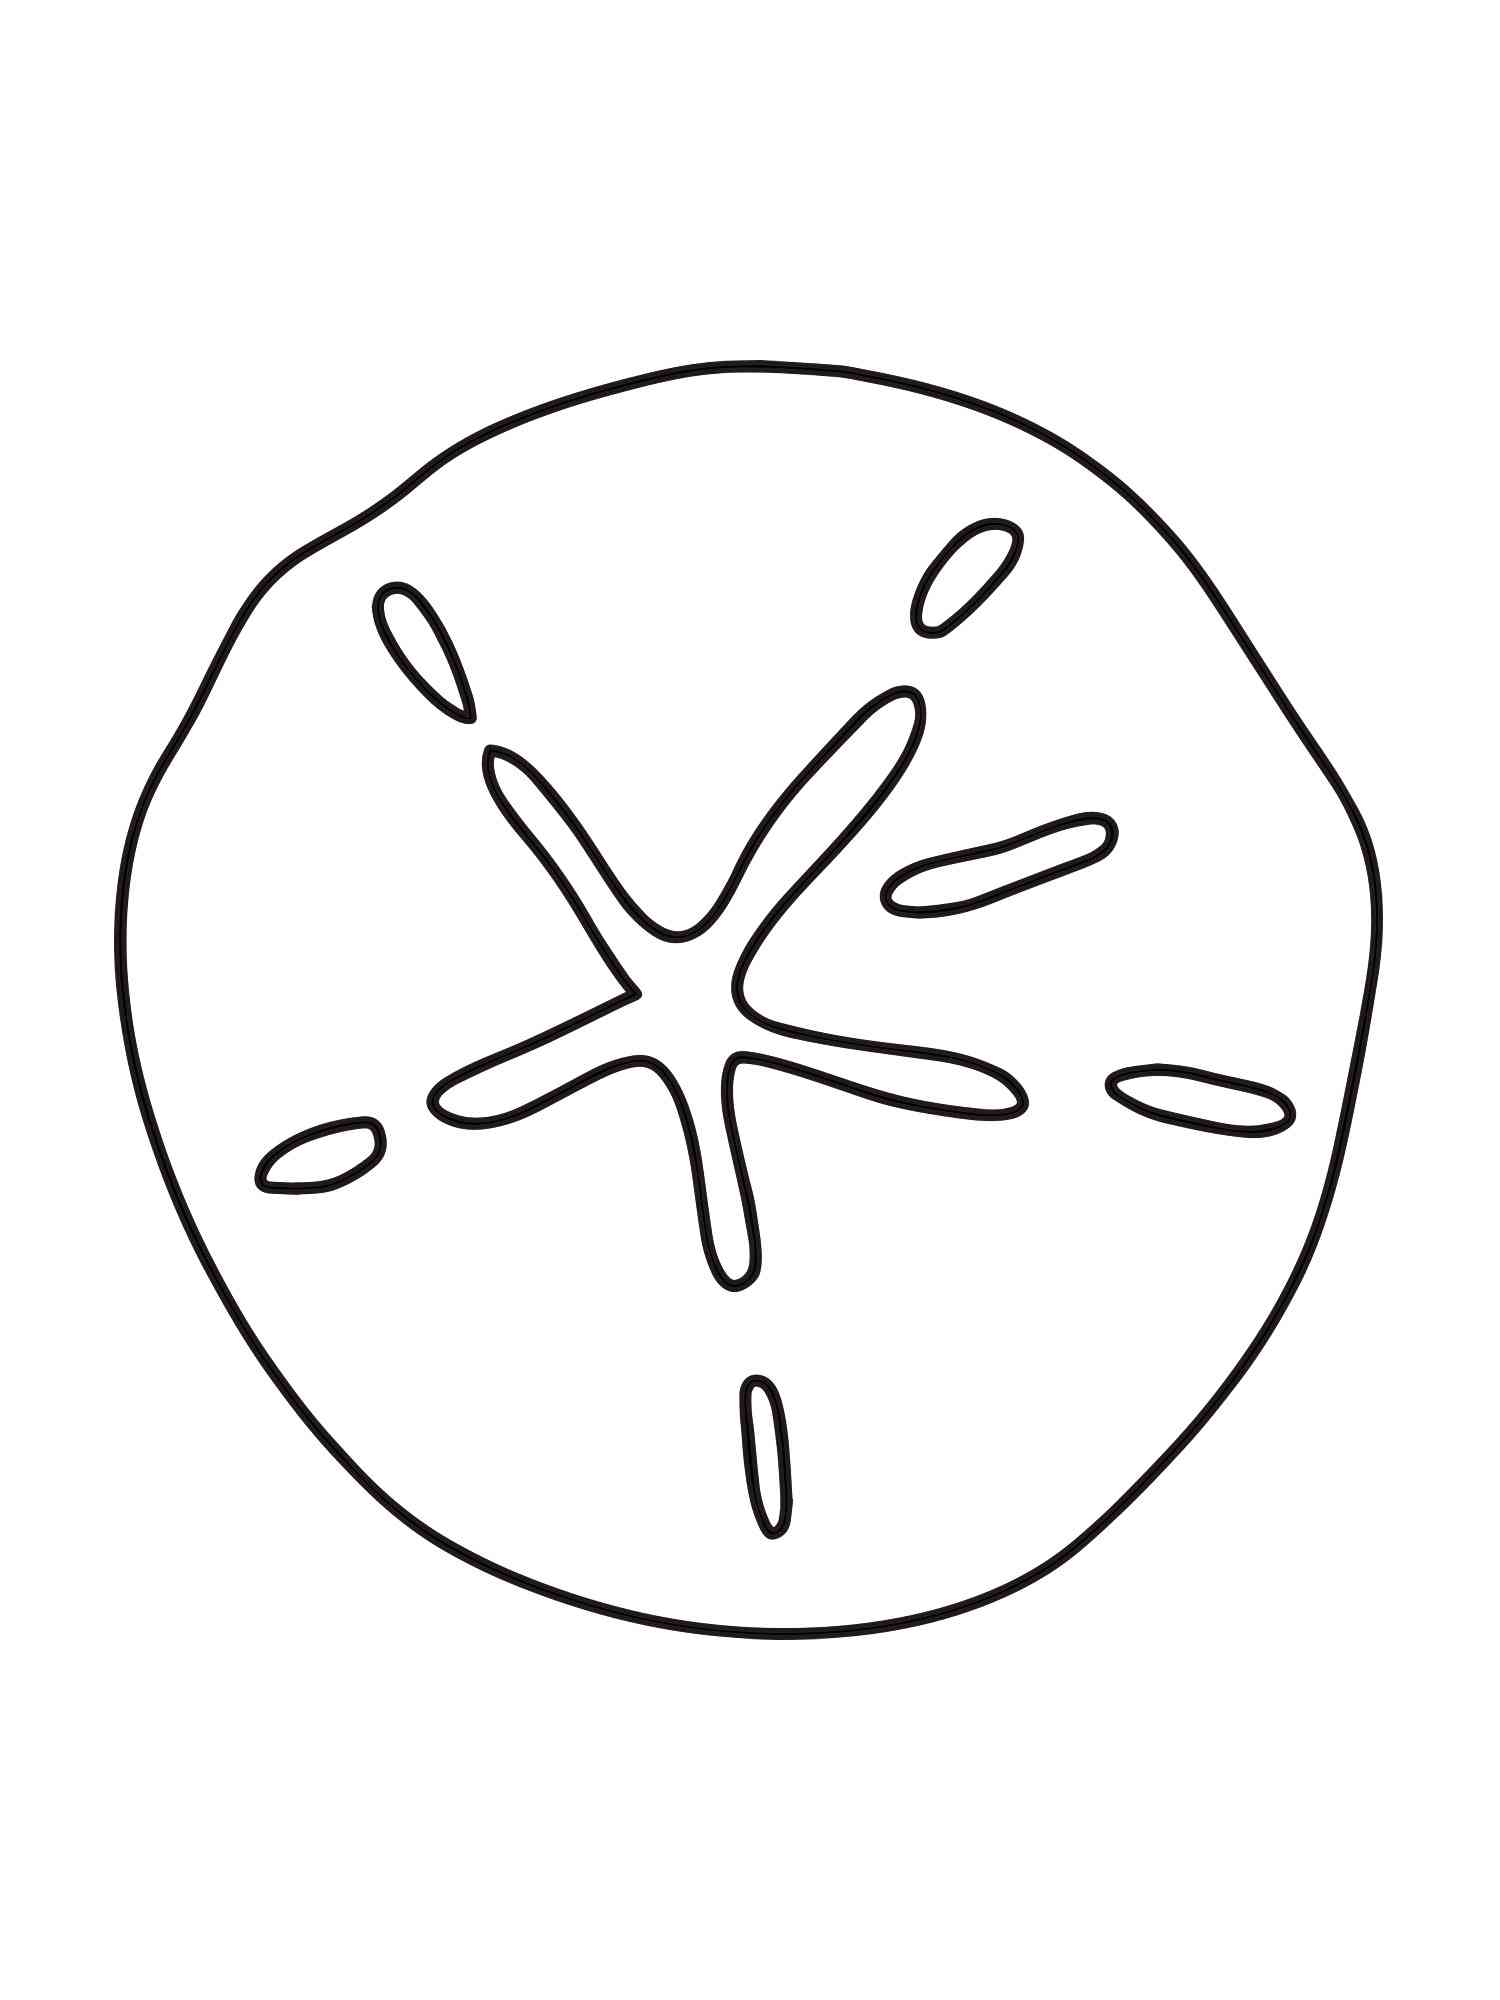 Sand Dollar 1 coloring page